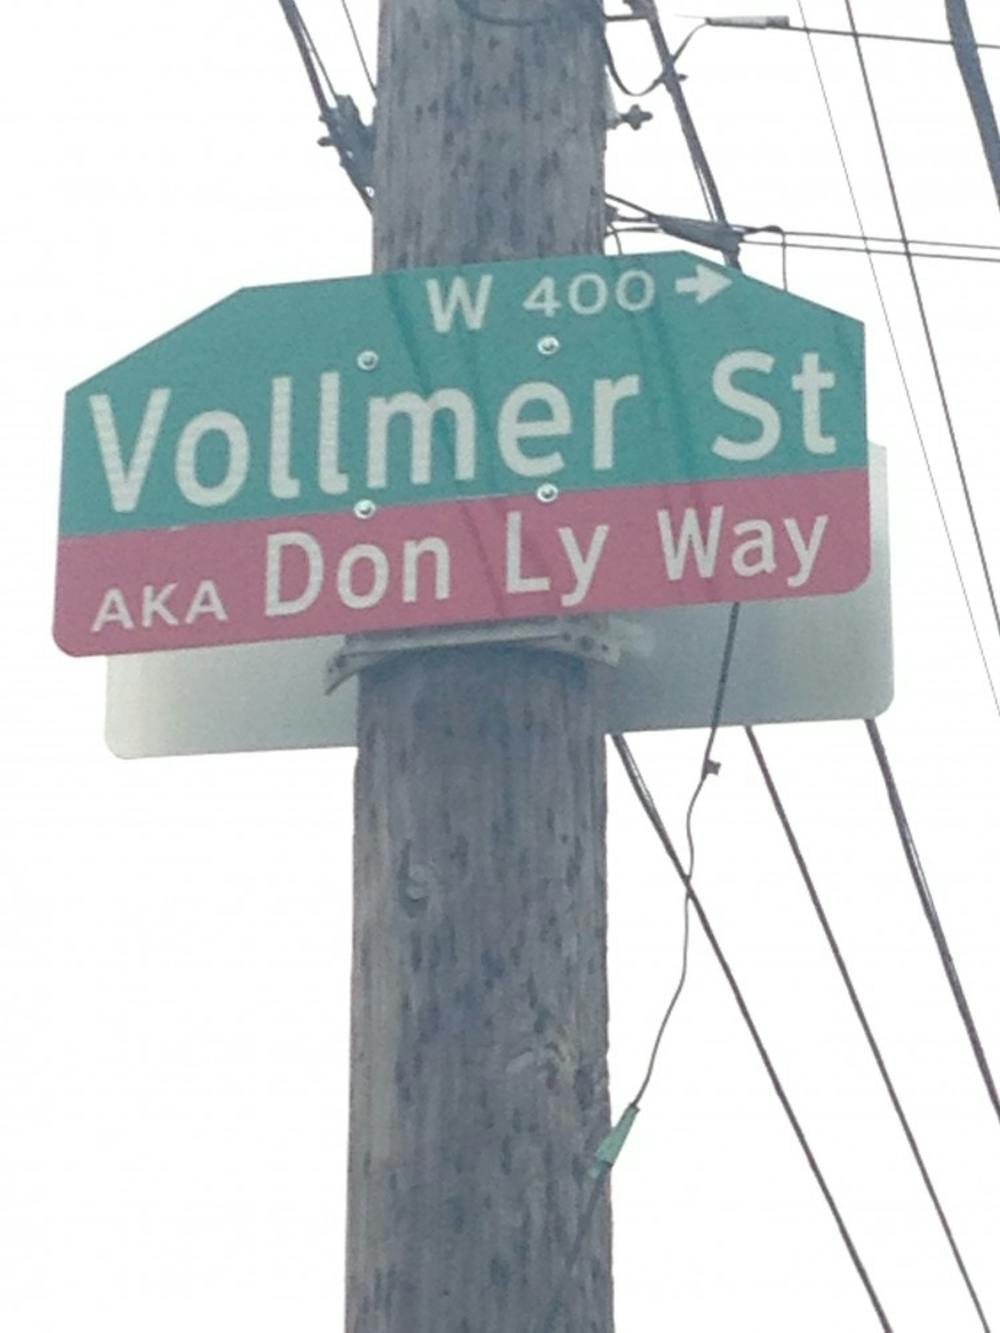 Vollmer Street, where Ly was killed, has been named in his memory.